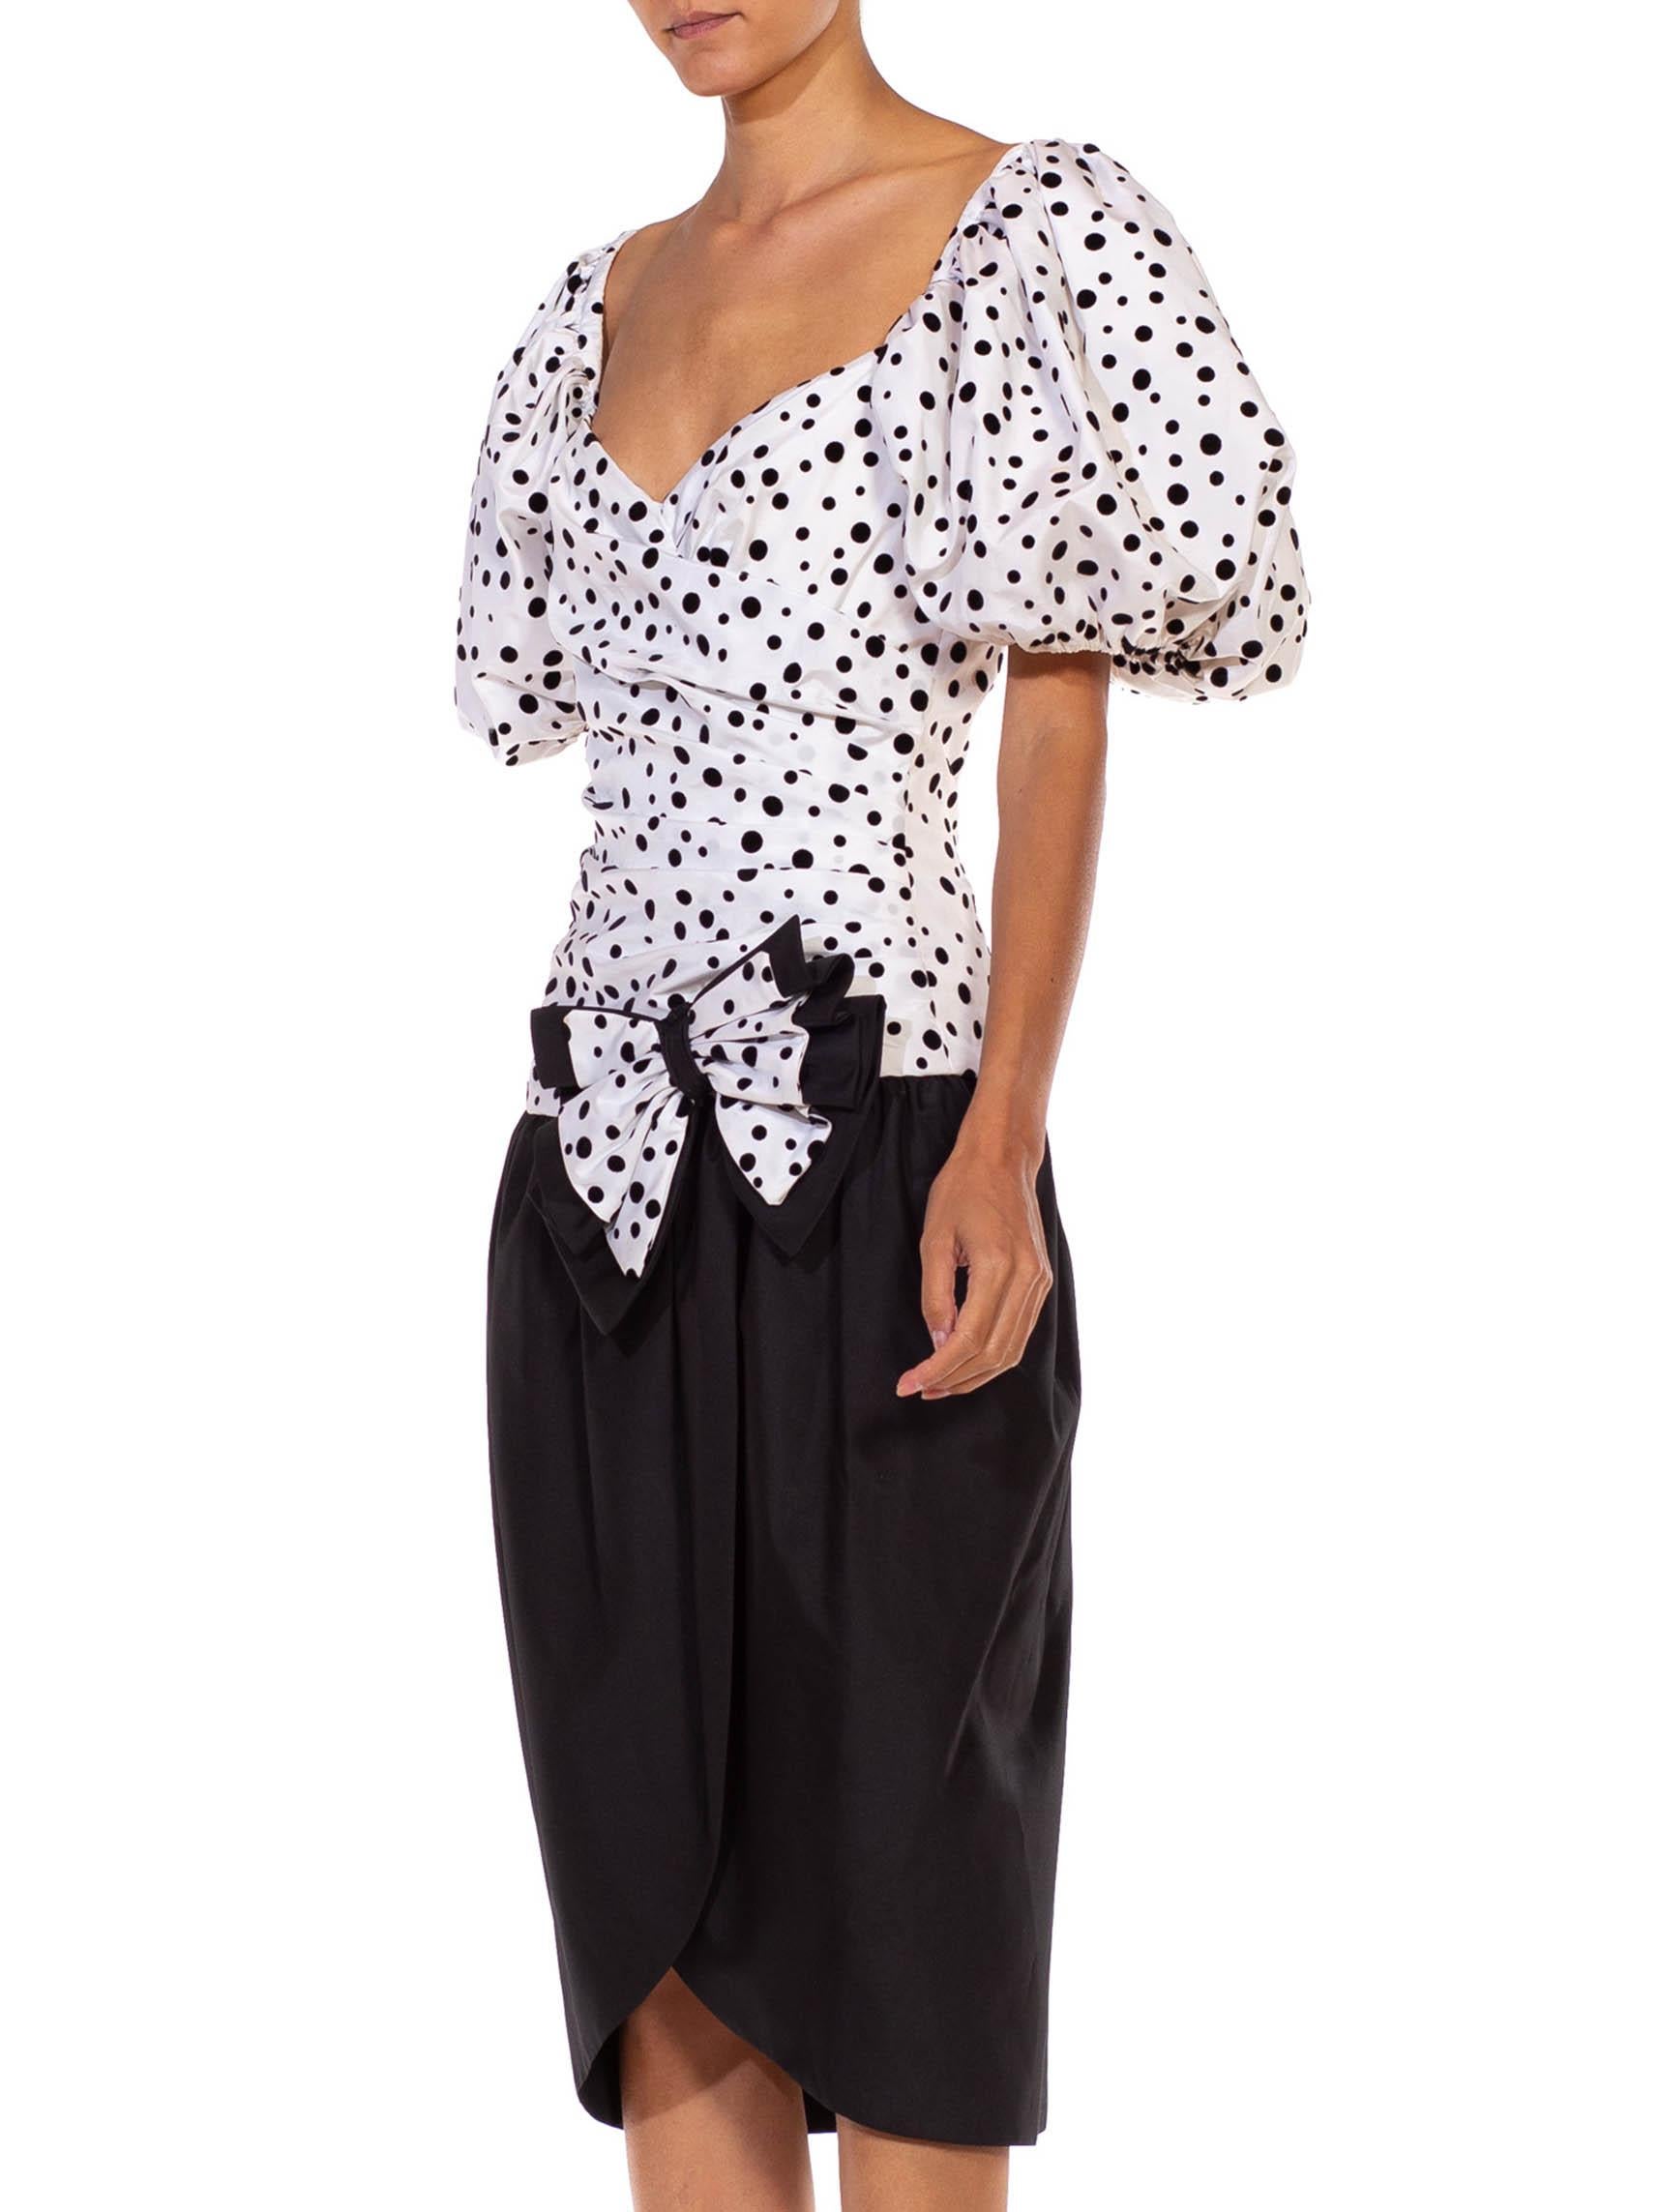 1980S Black & White Polka Dot Puff Sleeve Cocktail Dress With Large Bow For Sale 1